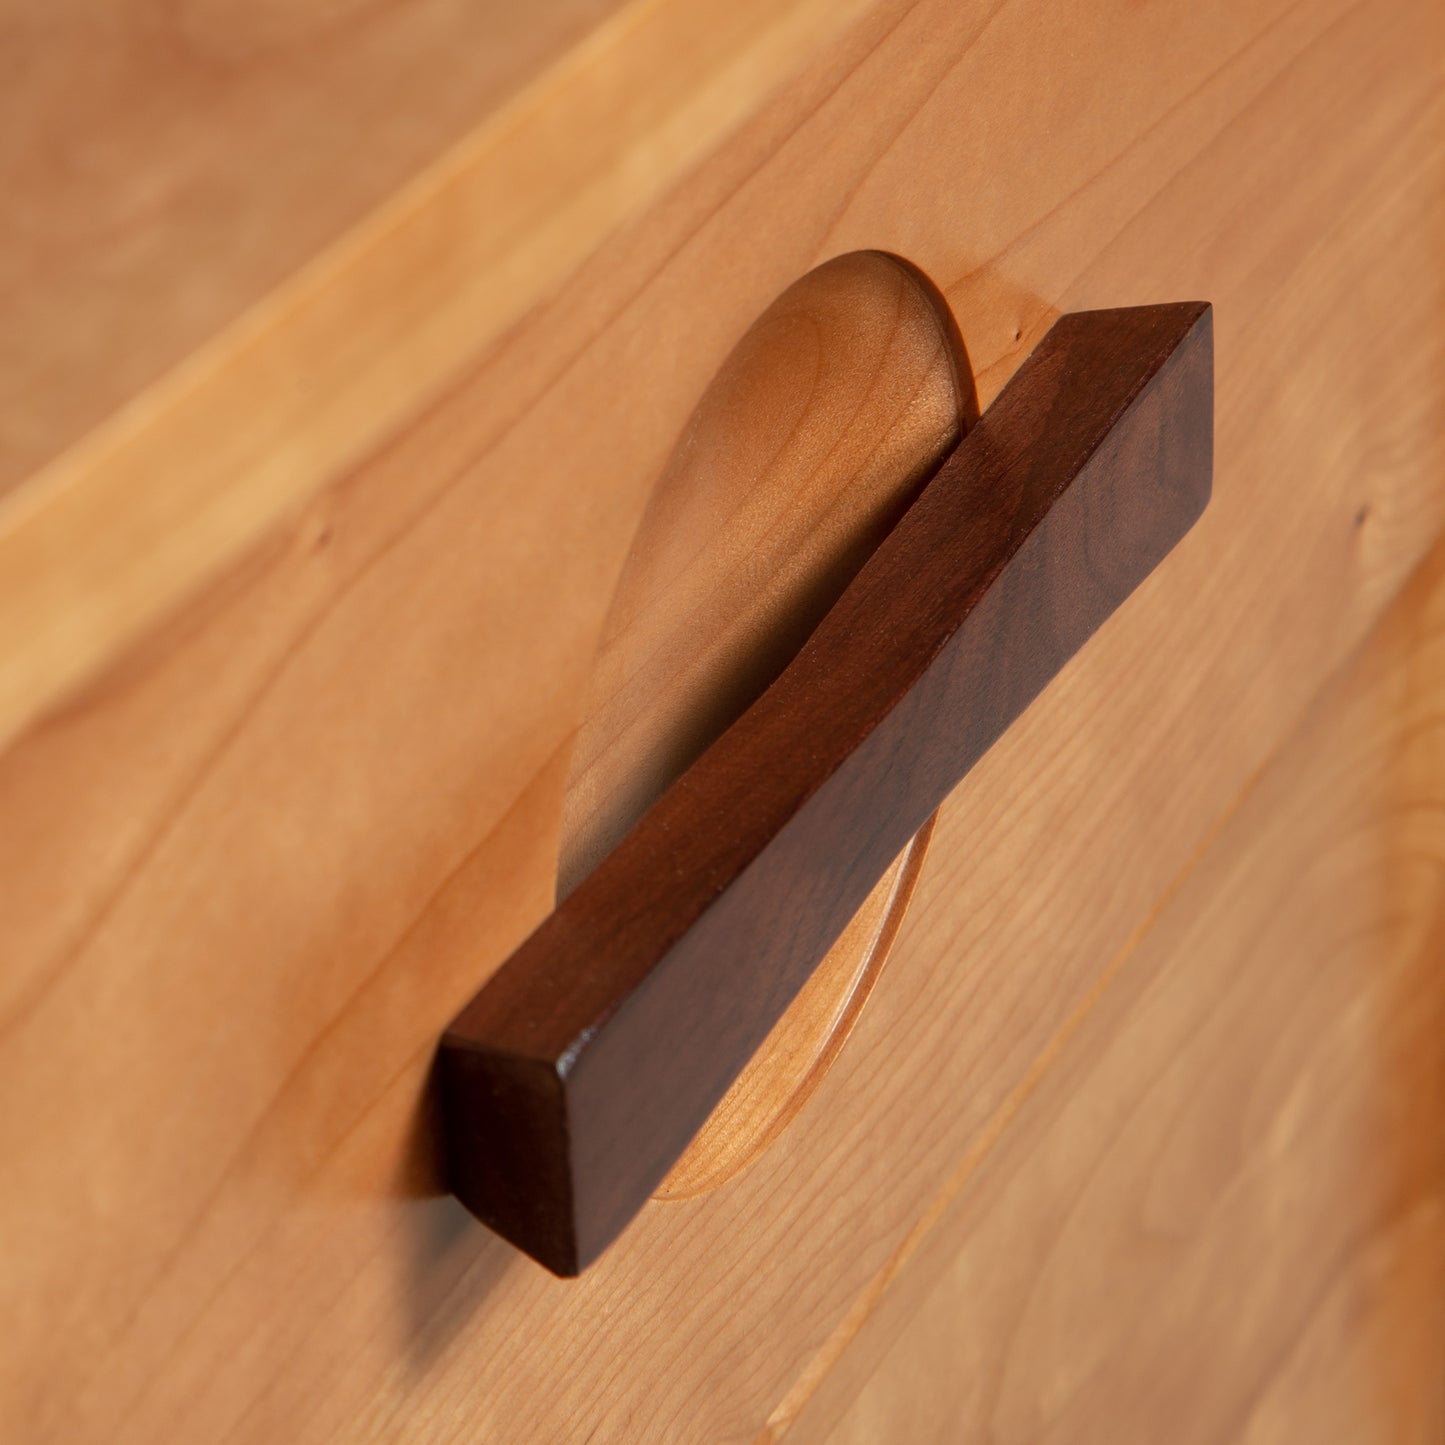 A Copeland Furniture Berkeley nightstand drawer knob mounted on a wooden cabinet drawer with a visible grain, angled to show the profile of the handle, reflecting the American Arts & Crafts style.